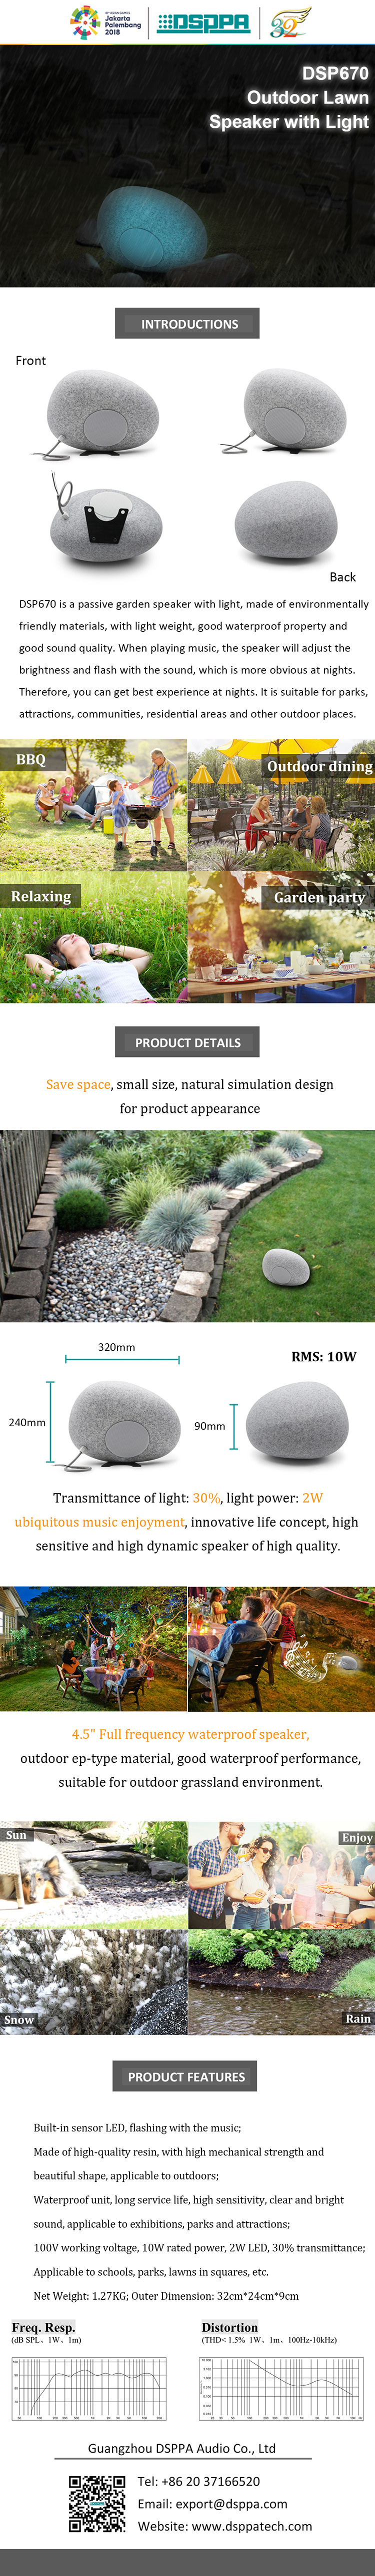 DSP670 Outdoor Lawn Speaker with Light